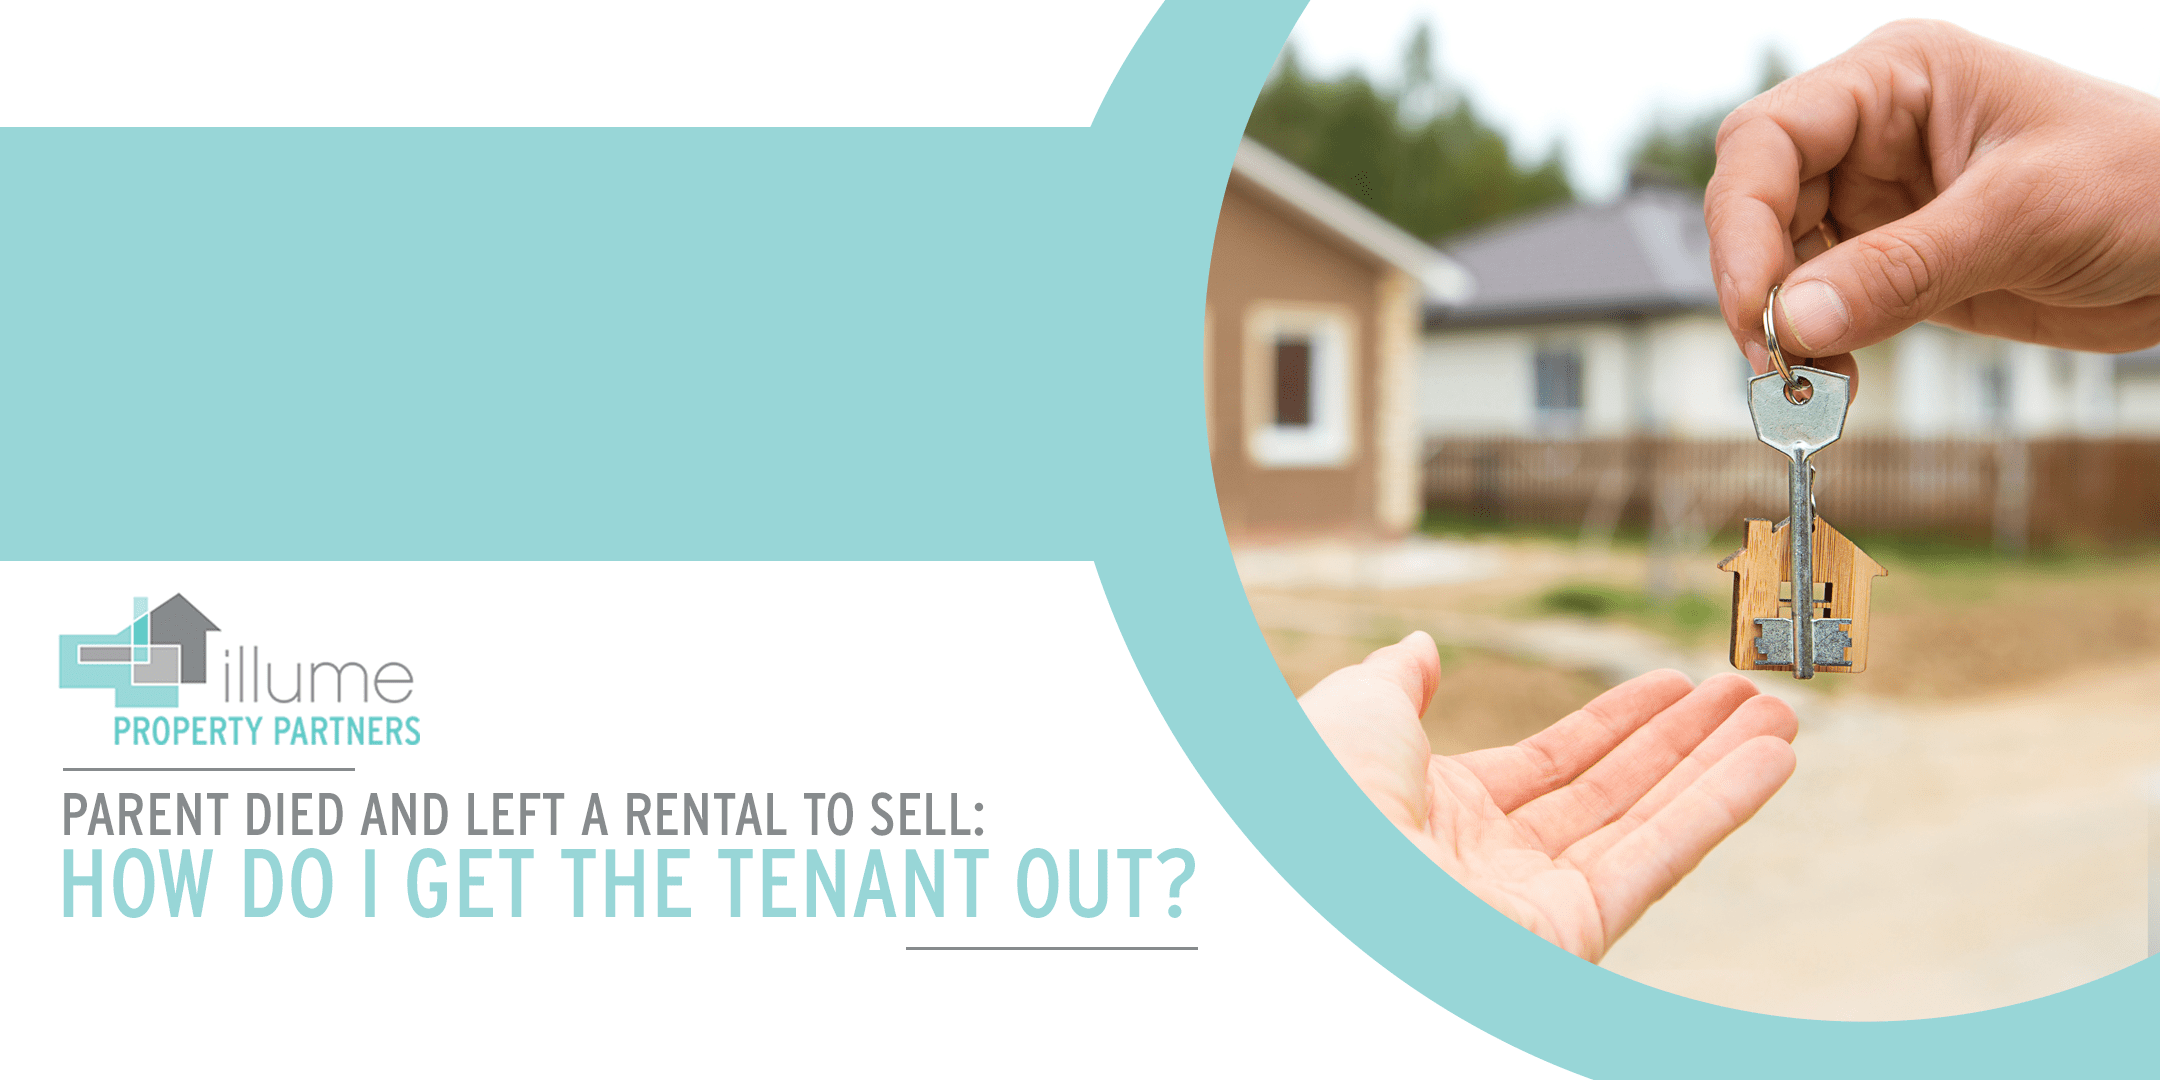 Parent Died and Left a Rental to Sell; How Do I Get the Tenant Out?